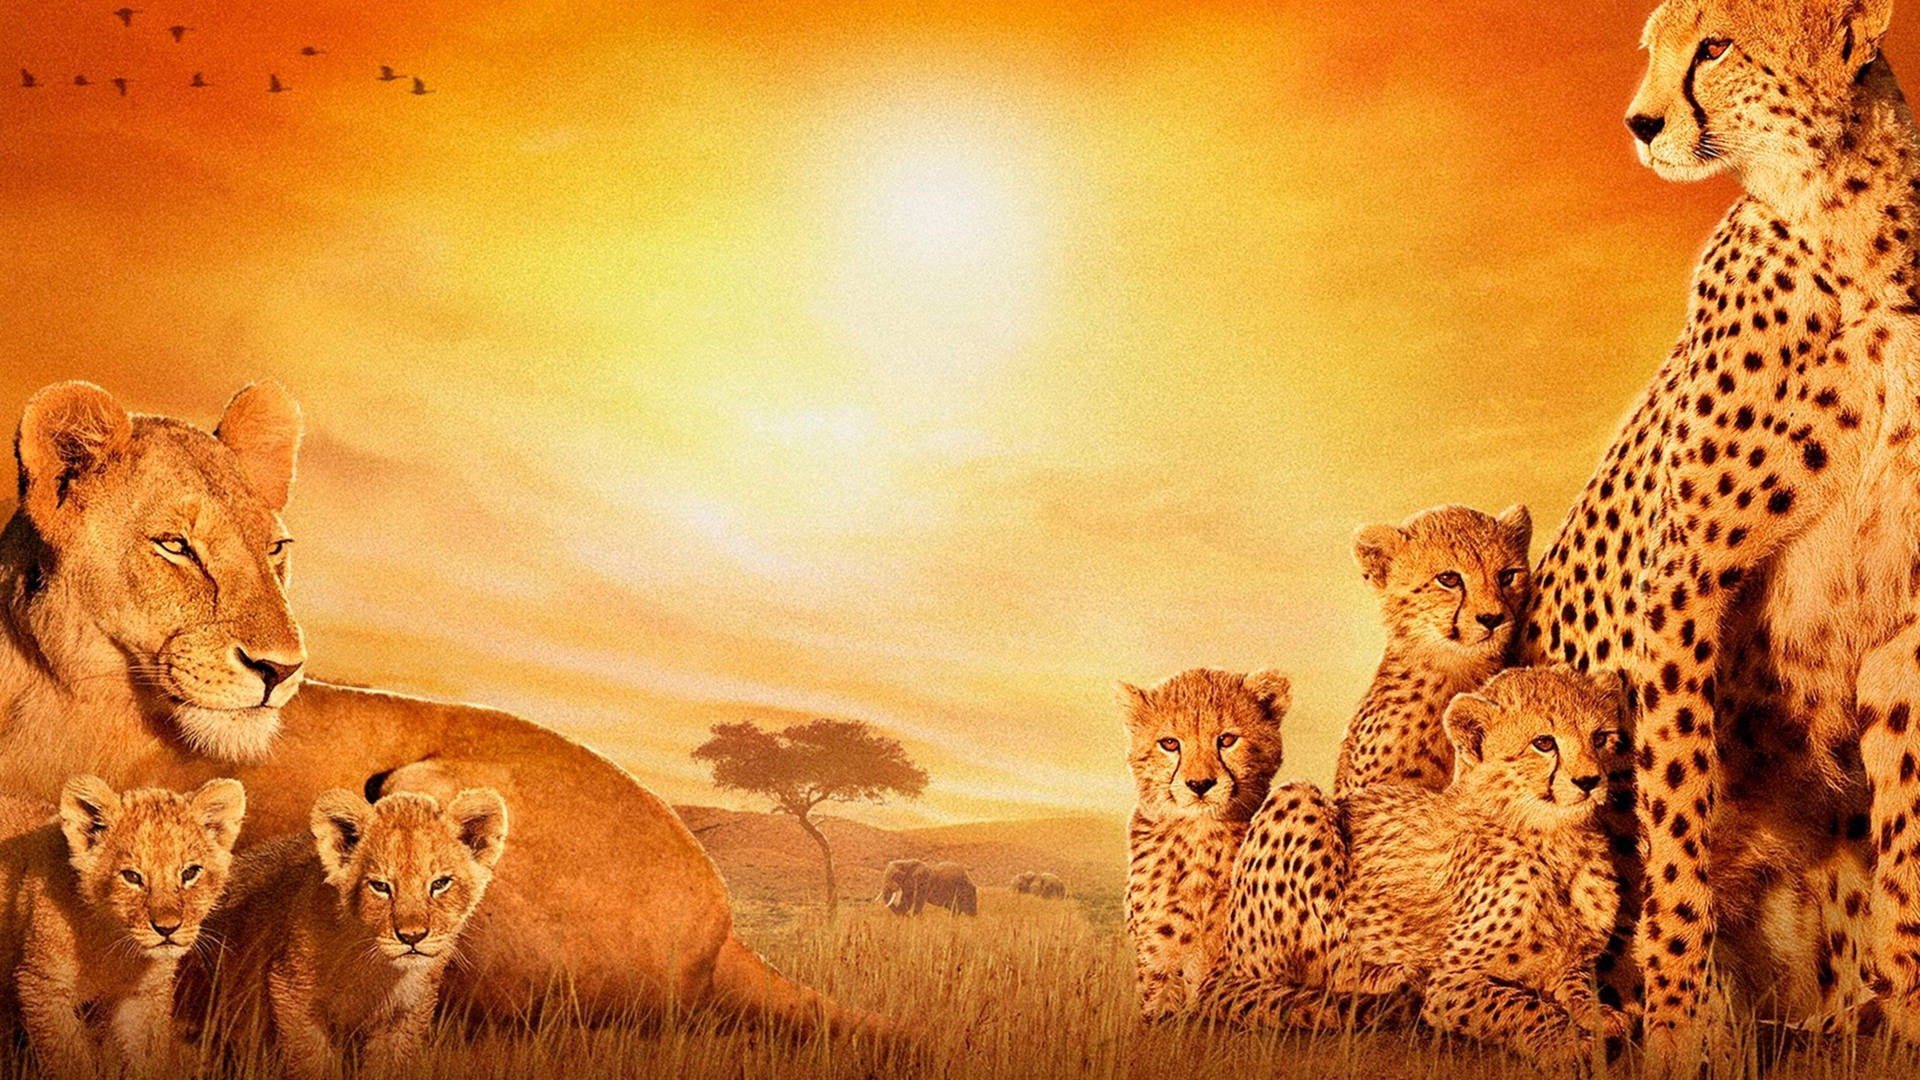 Lions And Cheetahs In Africa